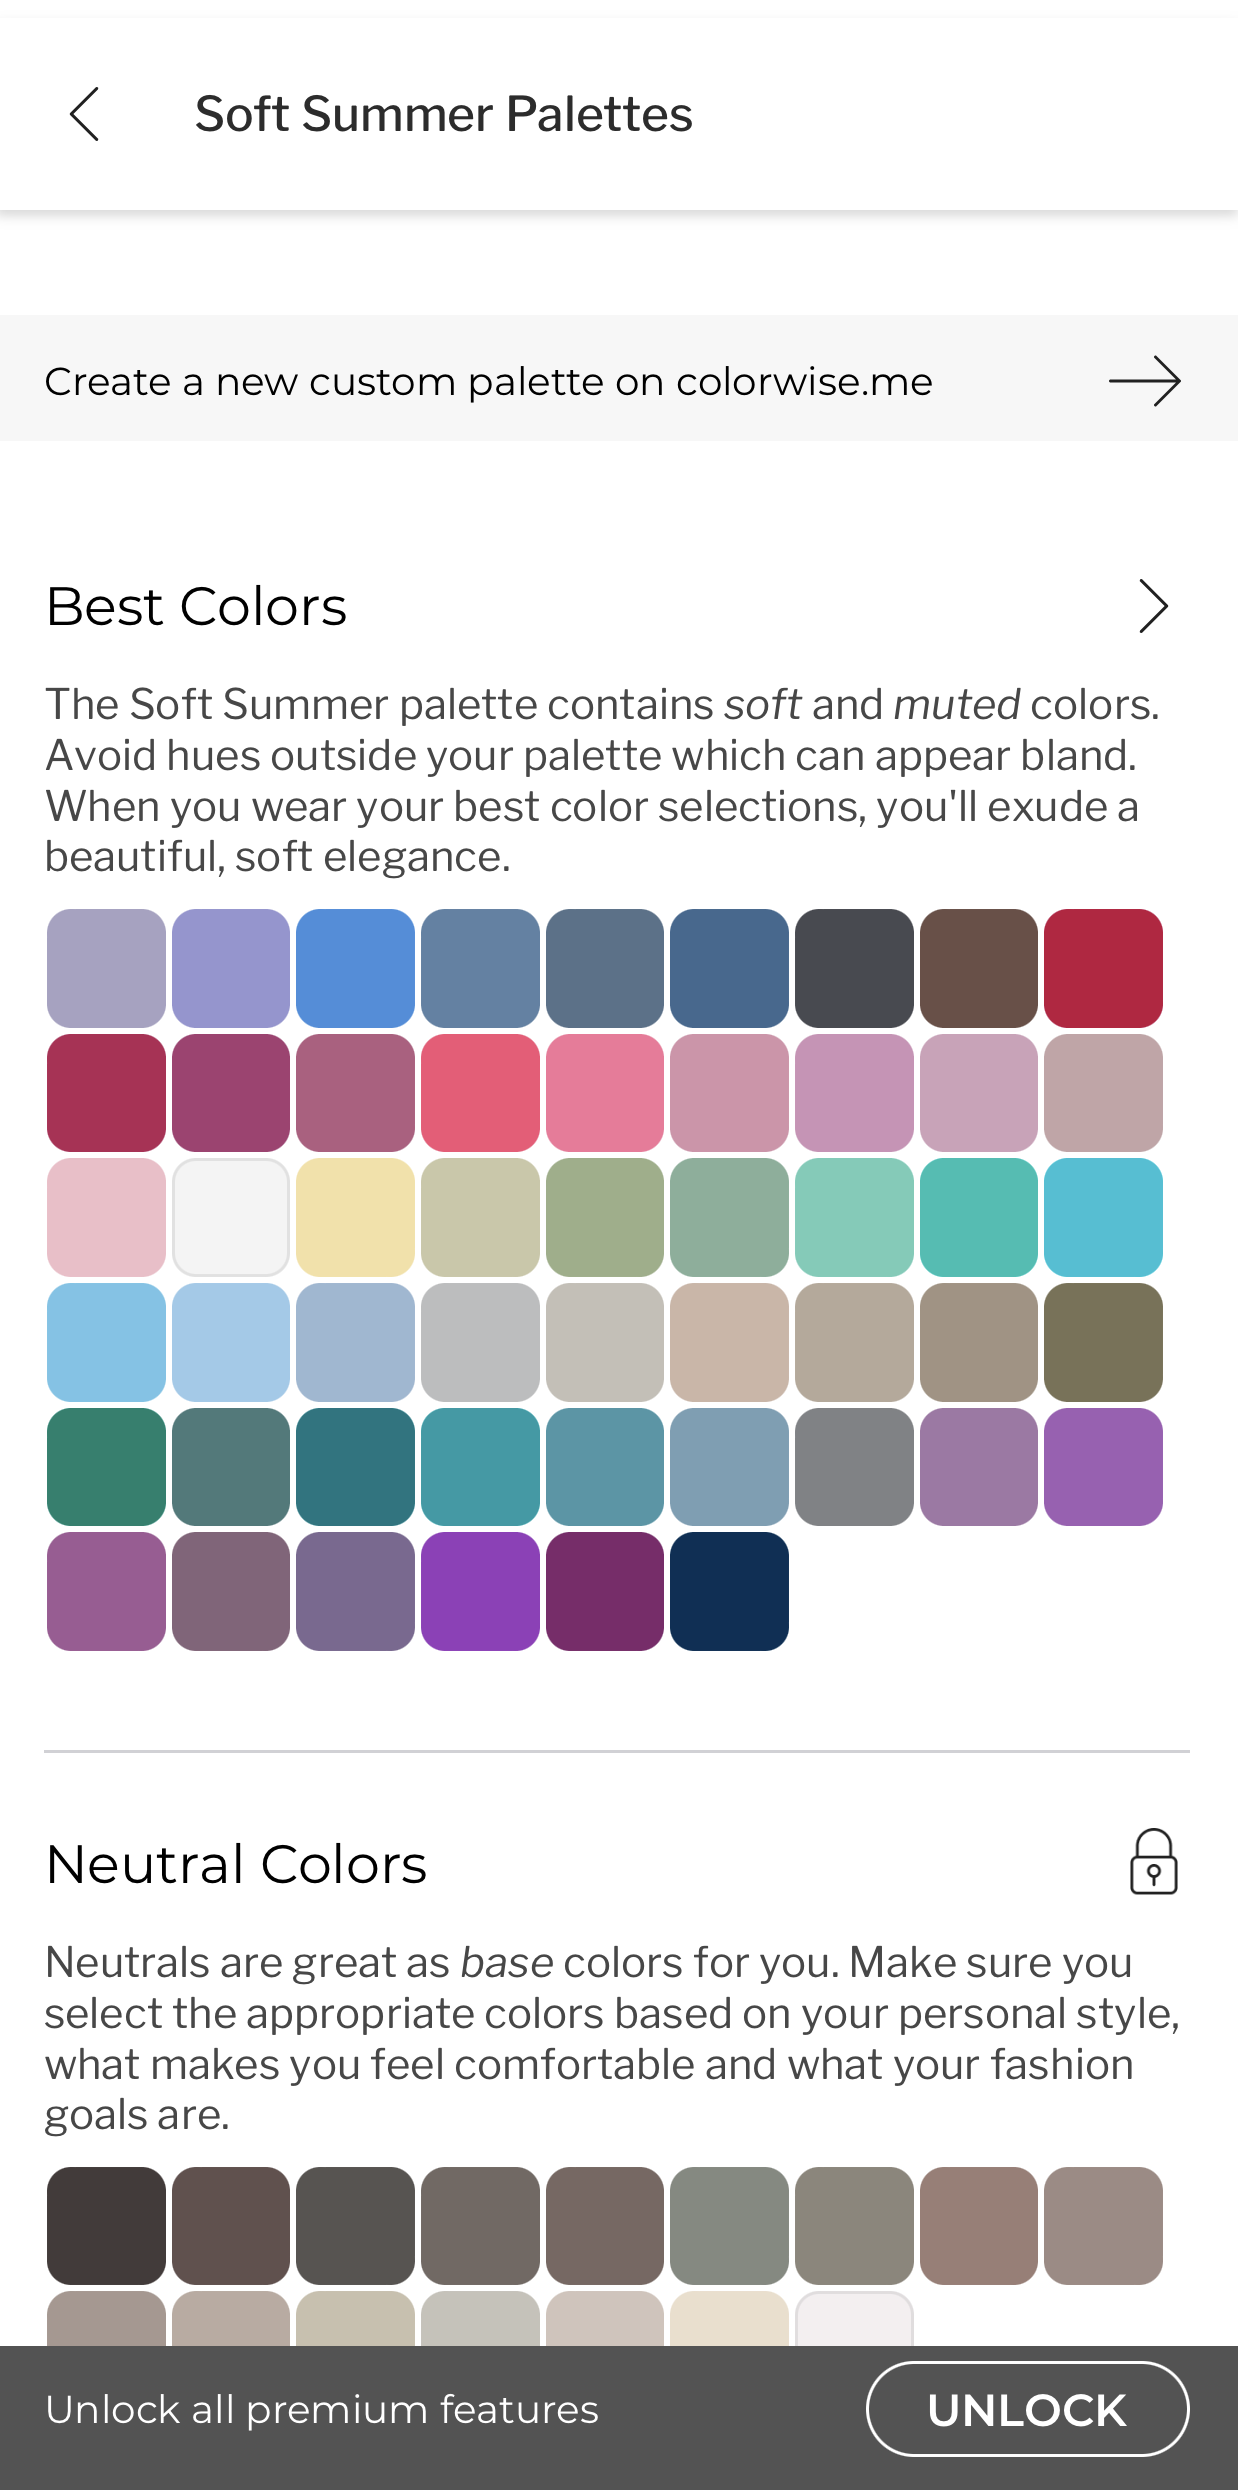 Do you know how to use the Color Chart?